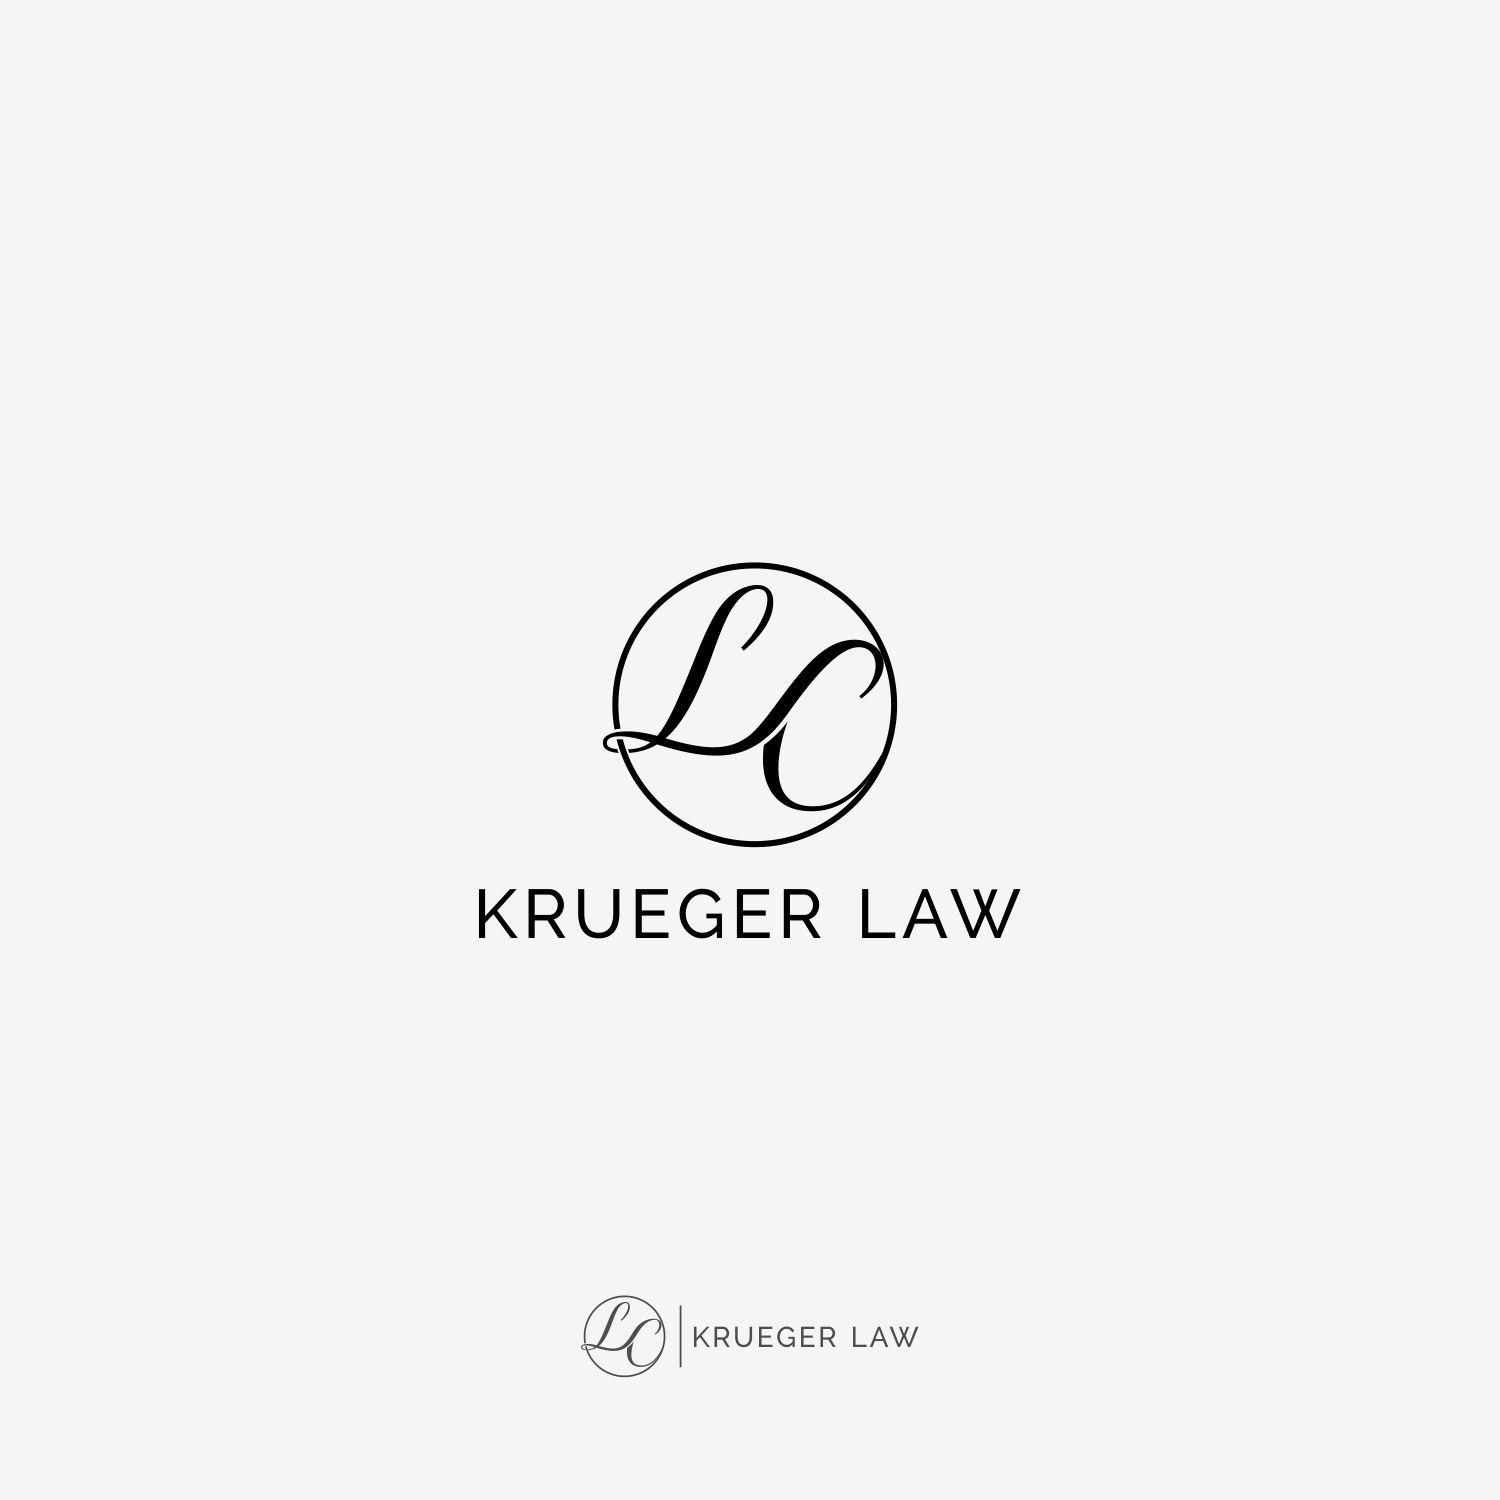 LC Soccer Logo - Professional, Conservative, Law Firm Logo Design for LC Krueger Law